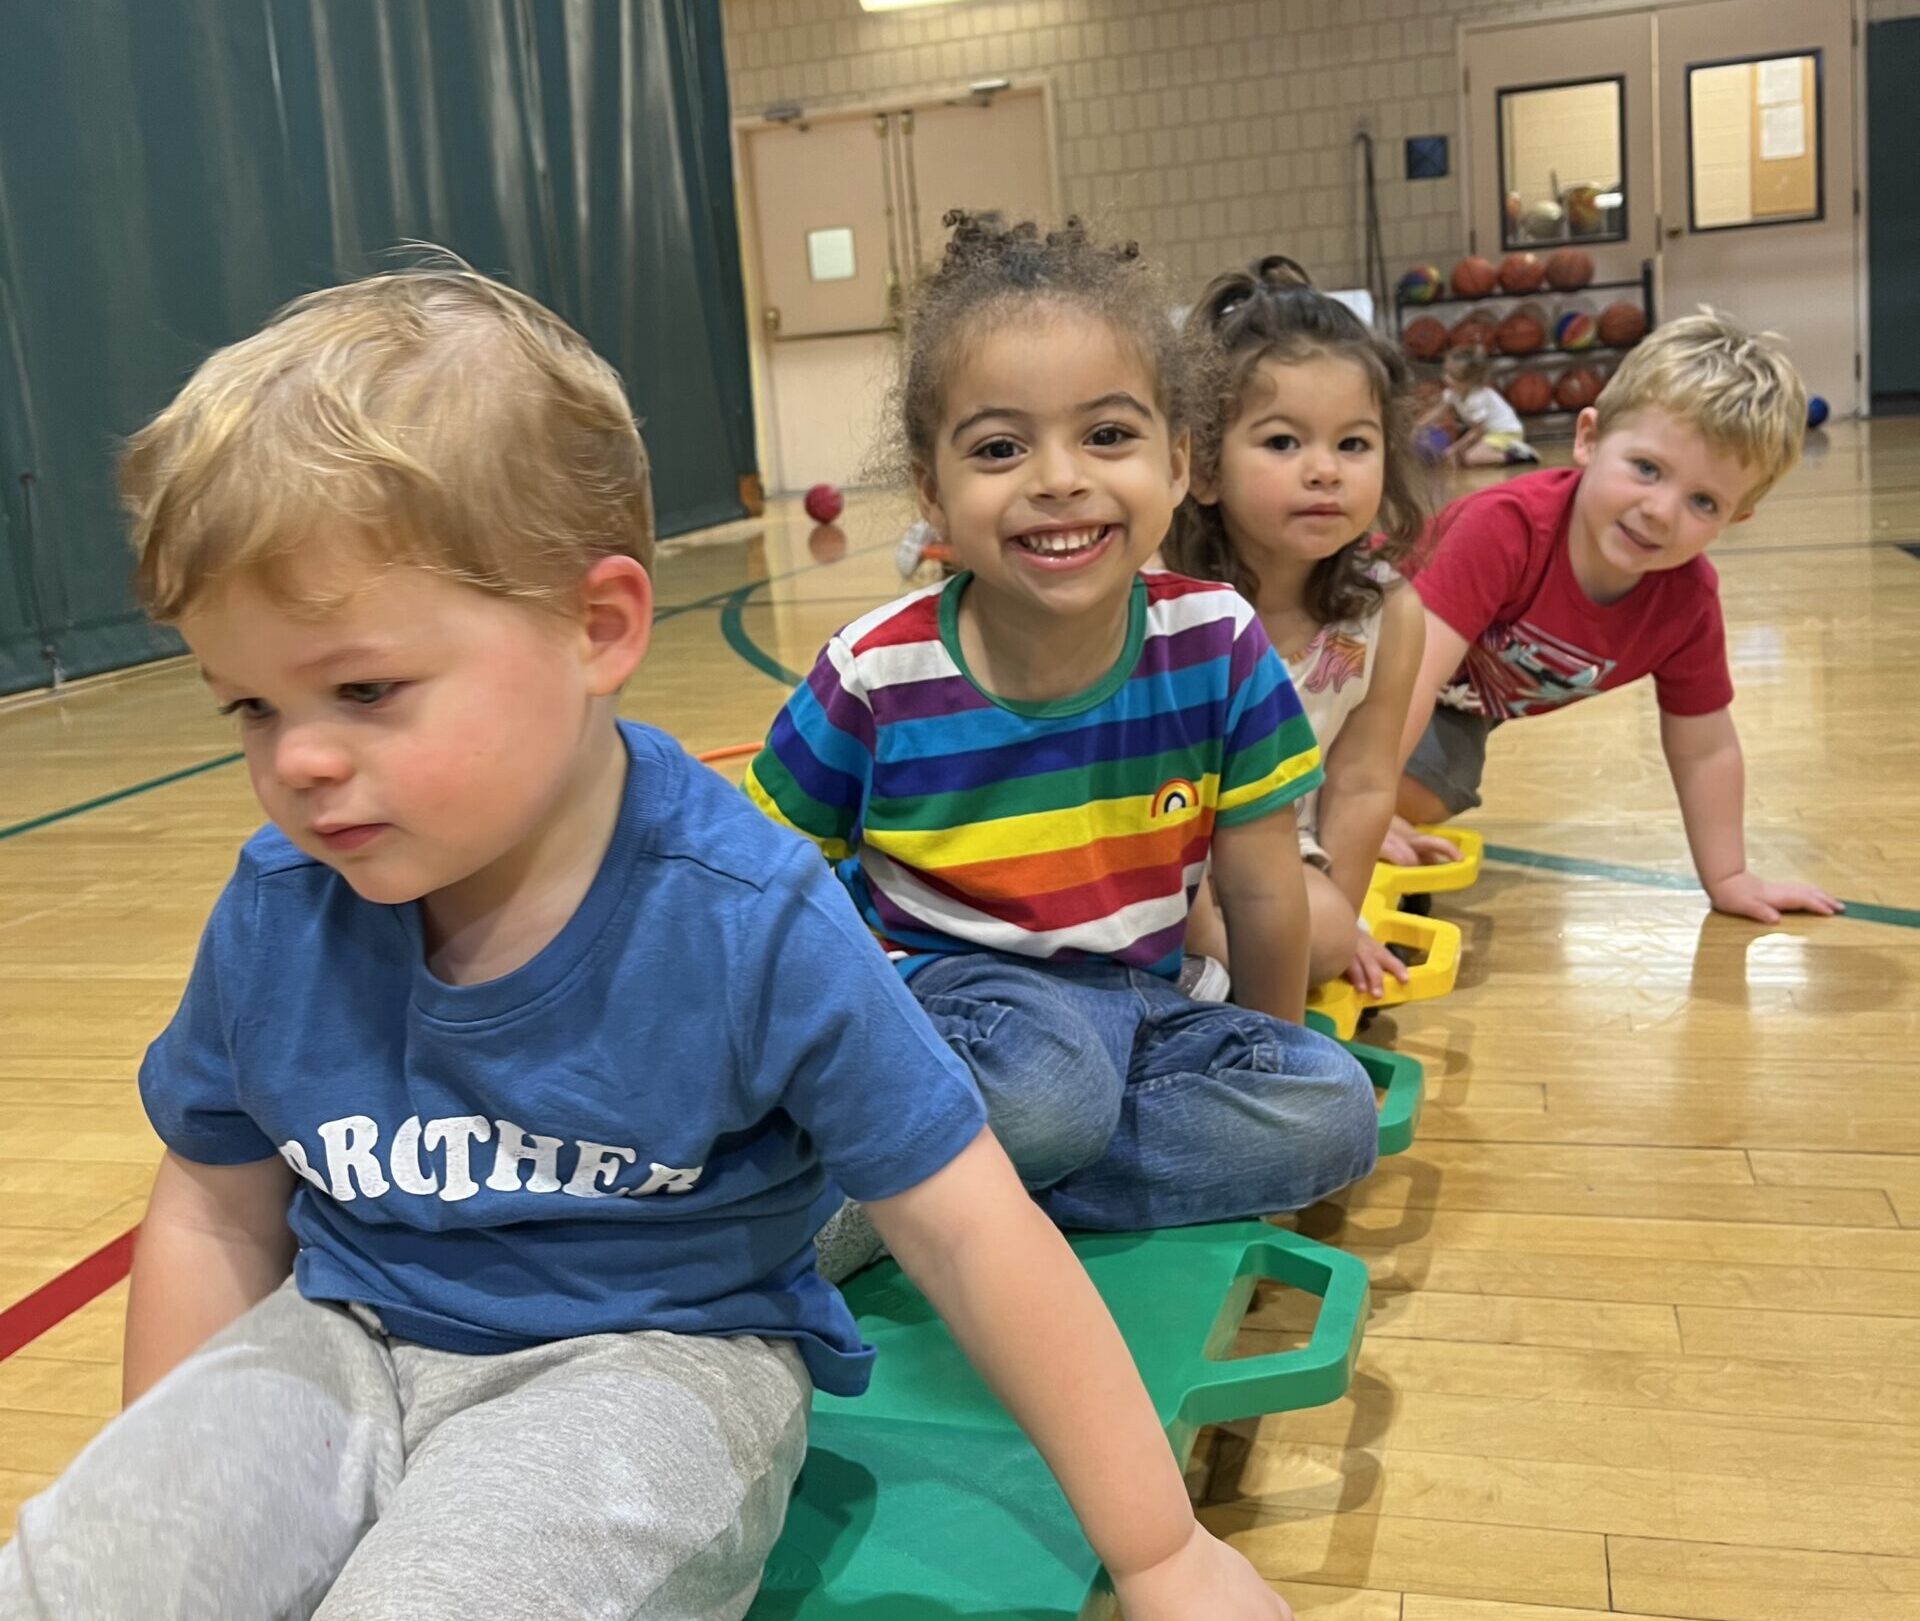 A group of young children smiling during the Little Ninja Warriors Obstacle Course class.